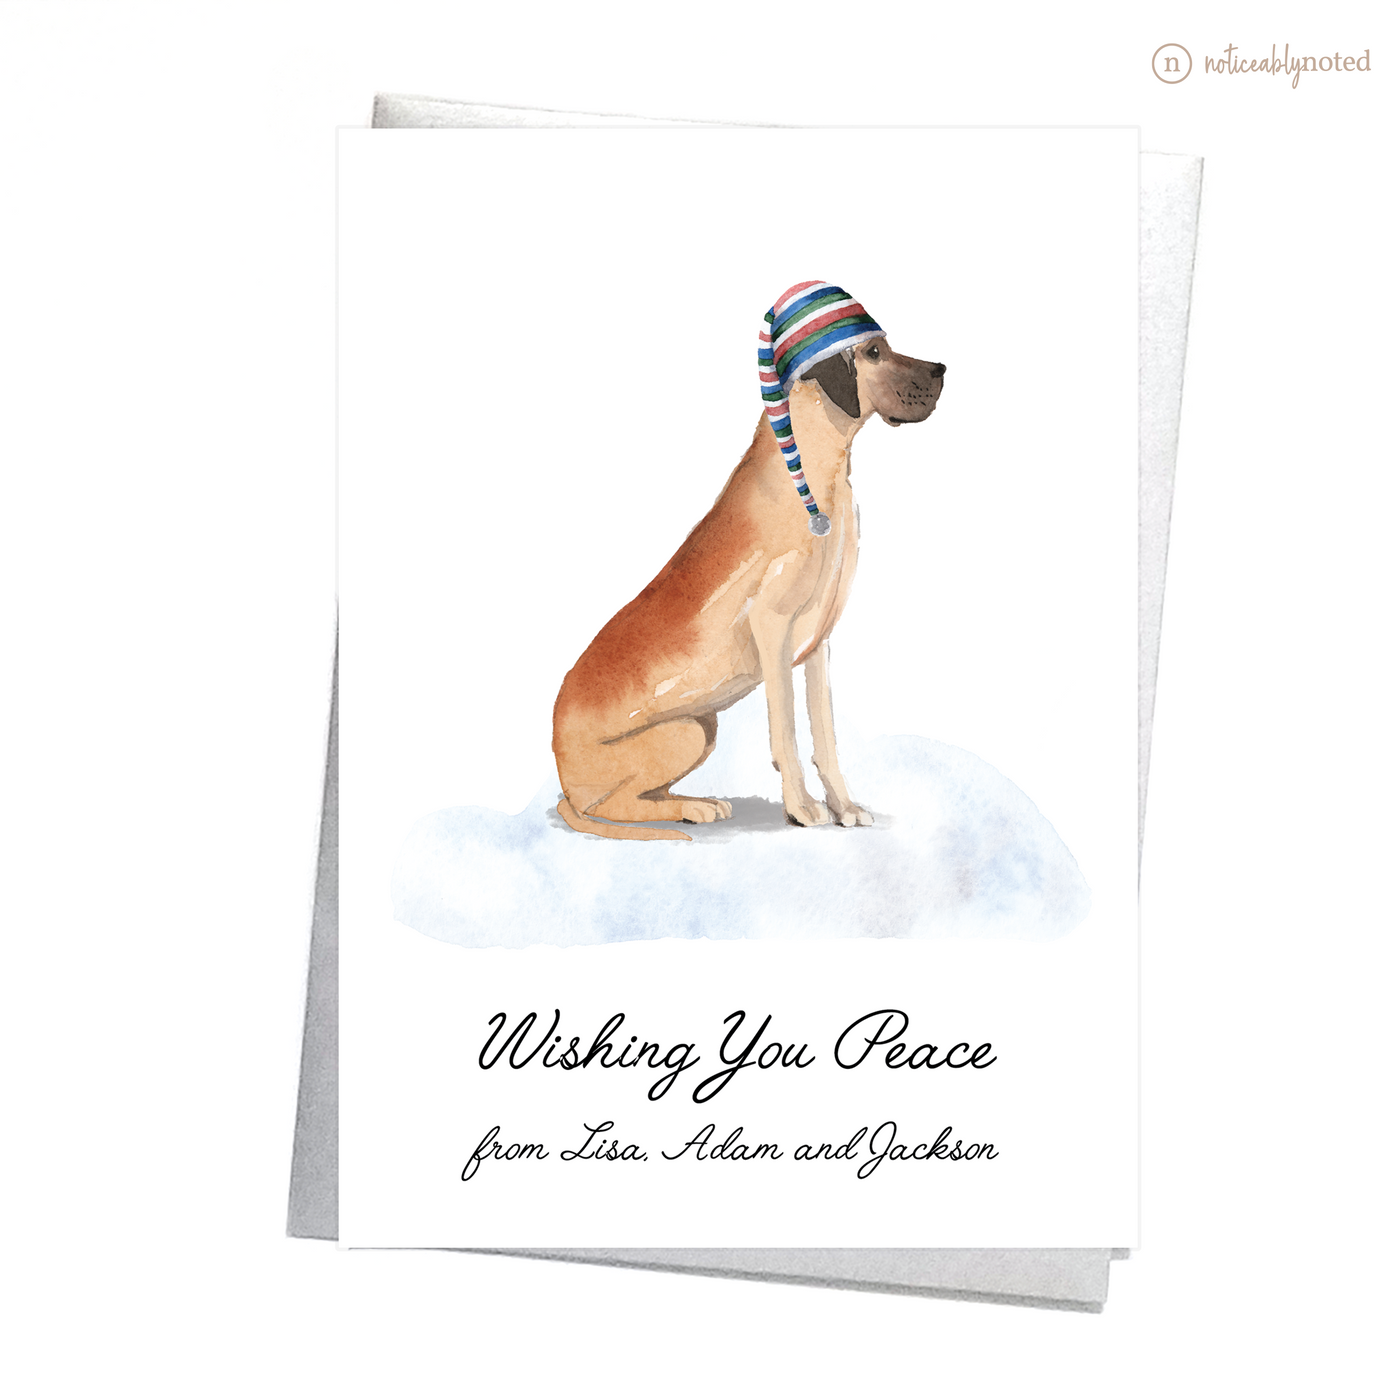 Great Dane Dog Christmas Card | Noticeably Noted